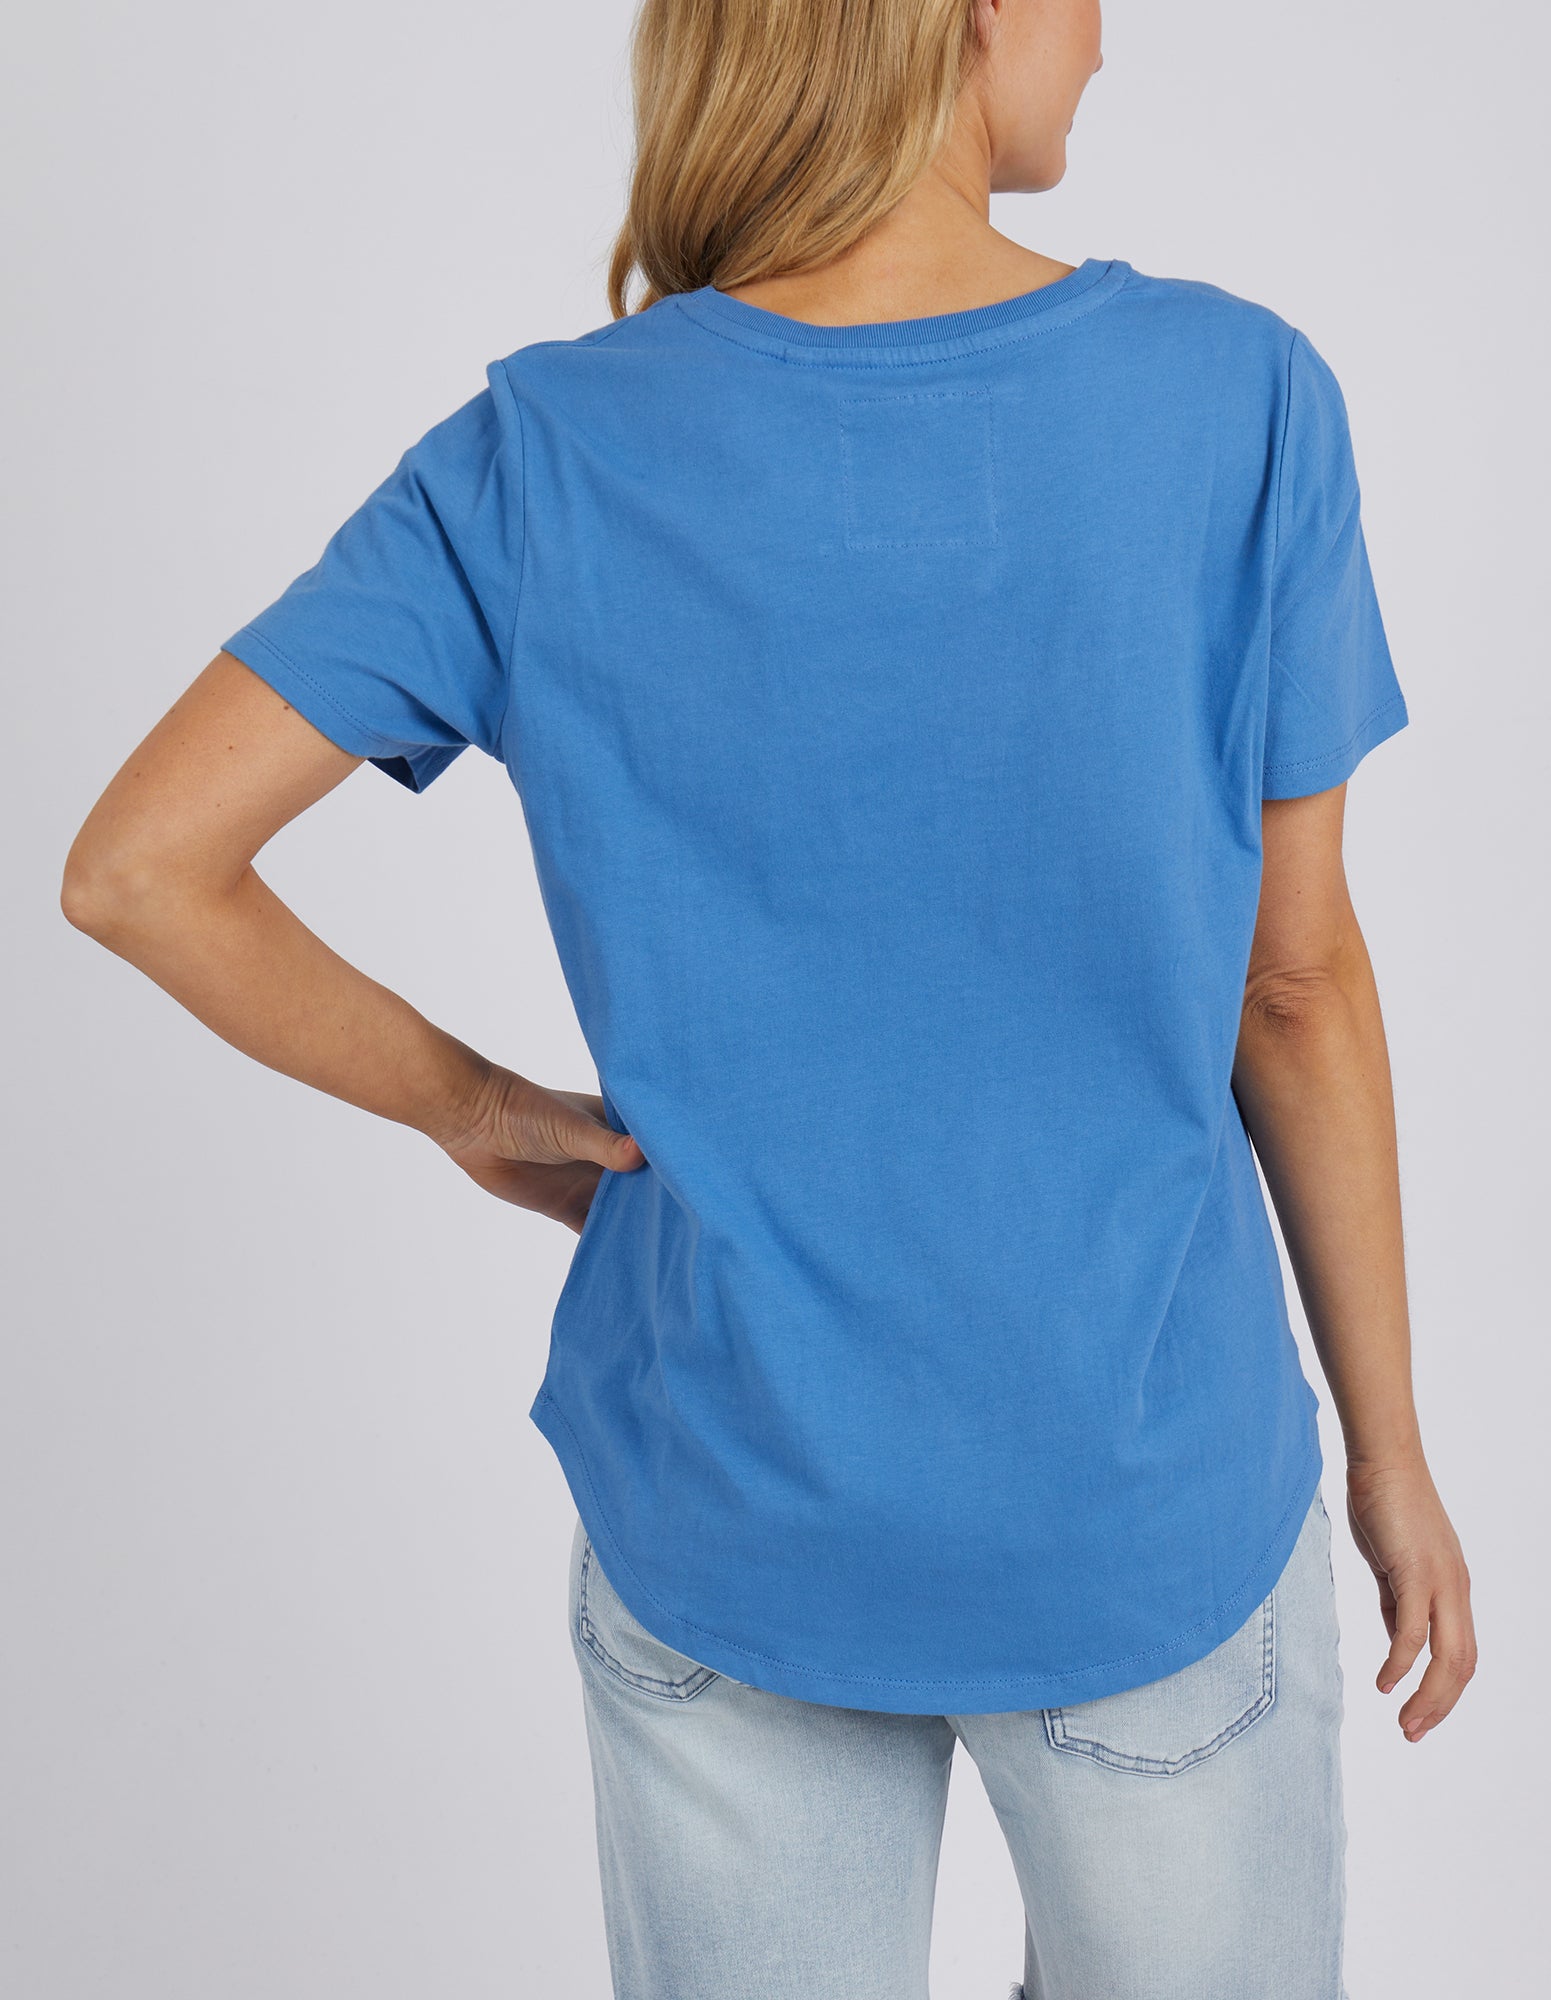 FOXWOOD TEE TRANQUIL BLUE